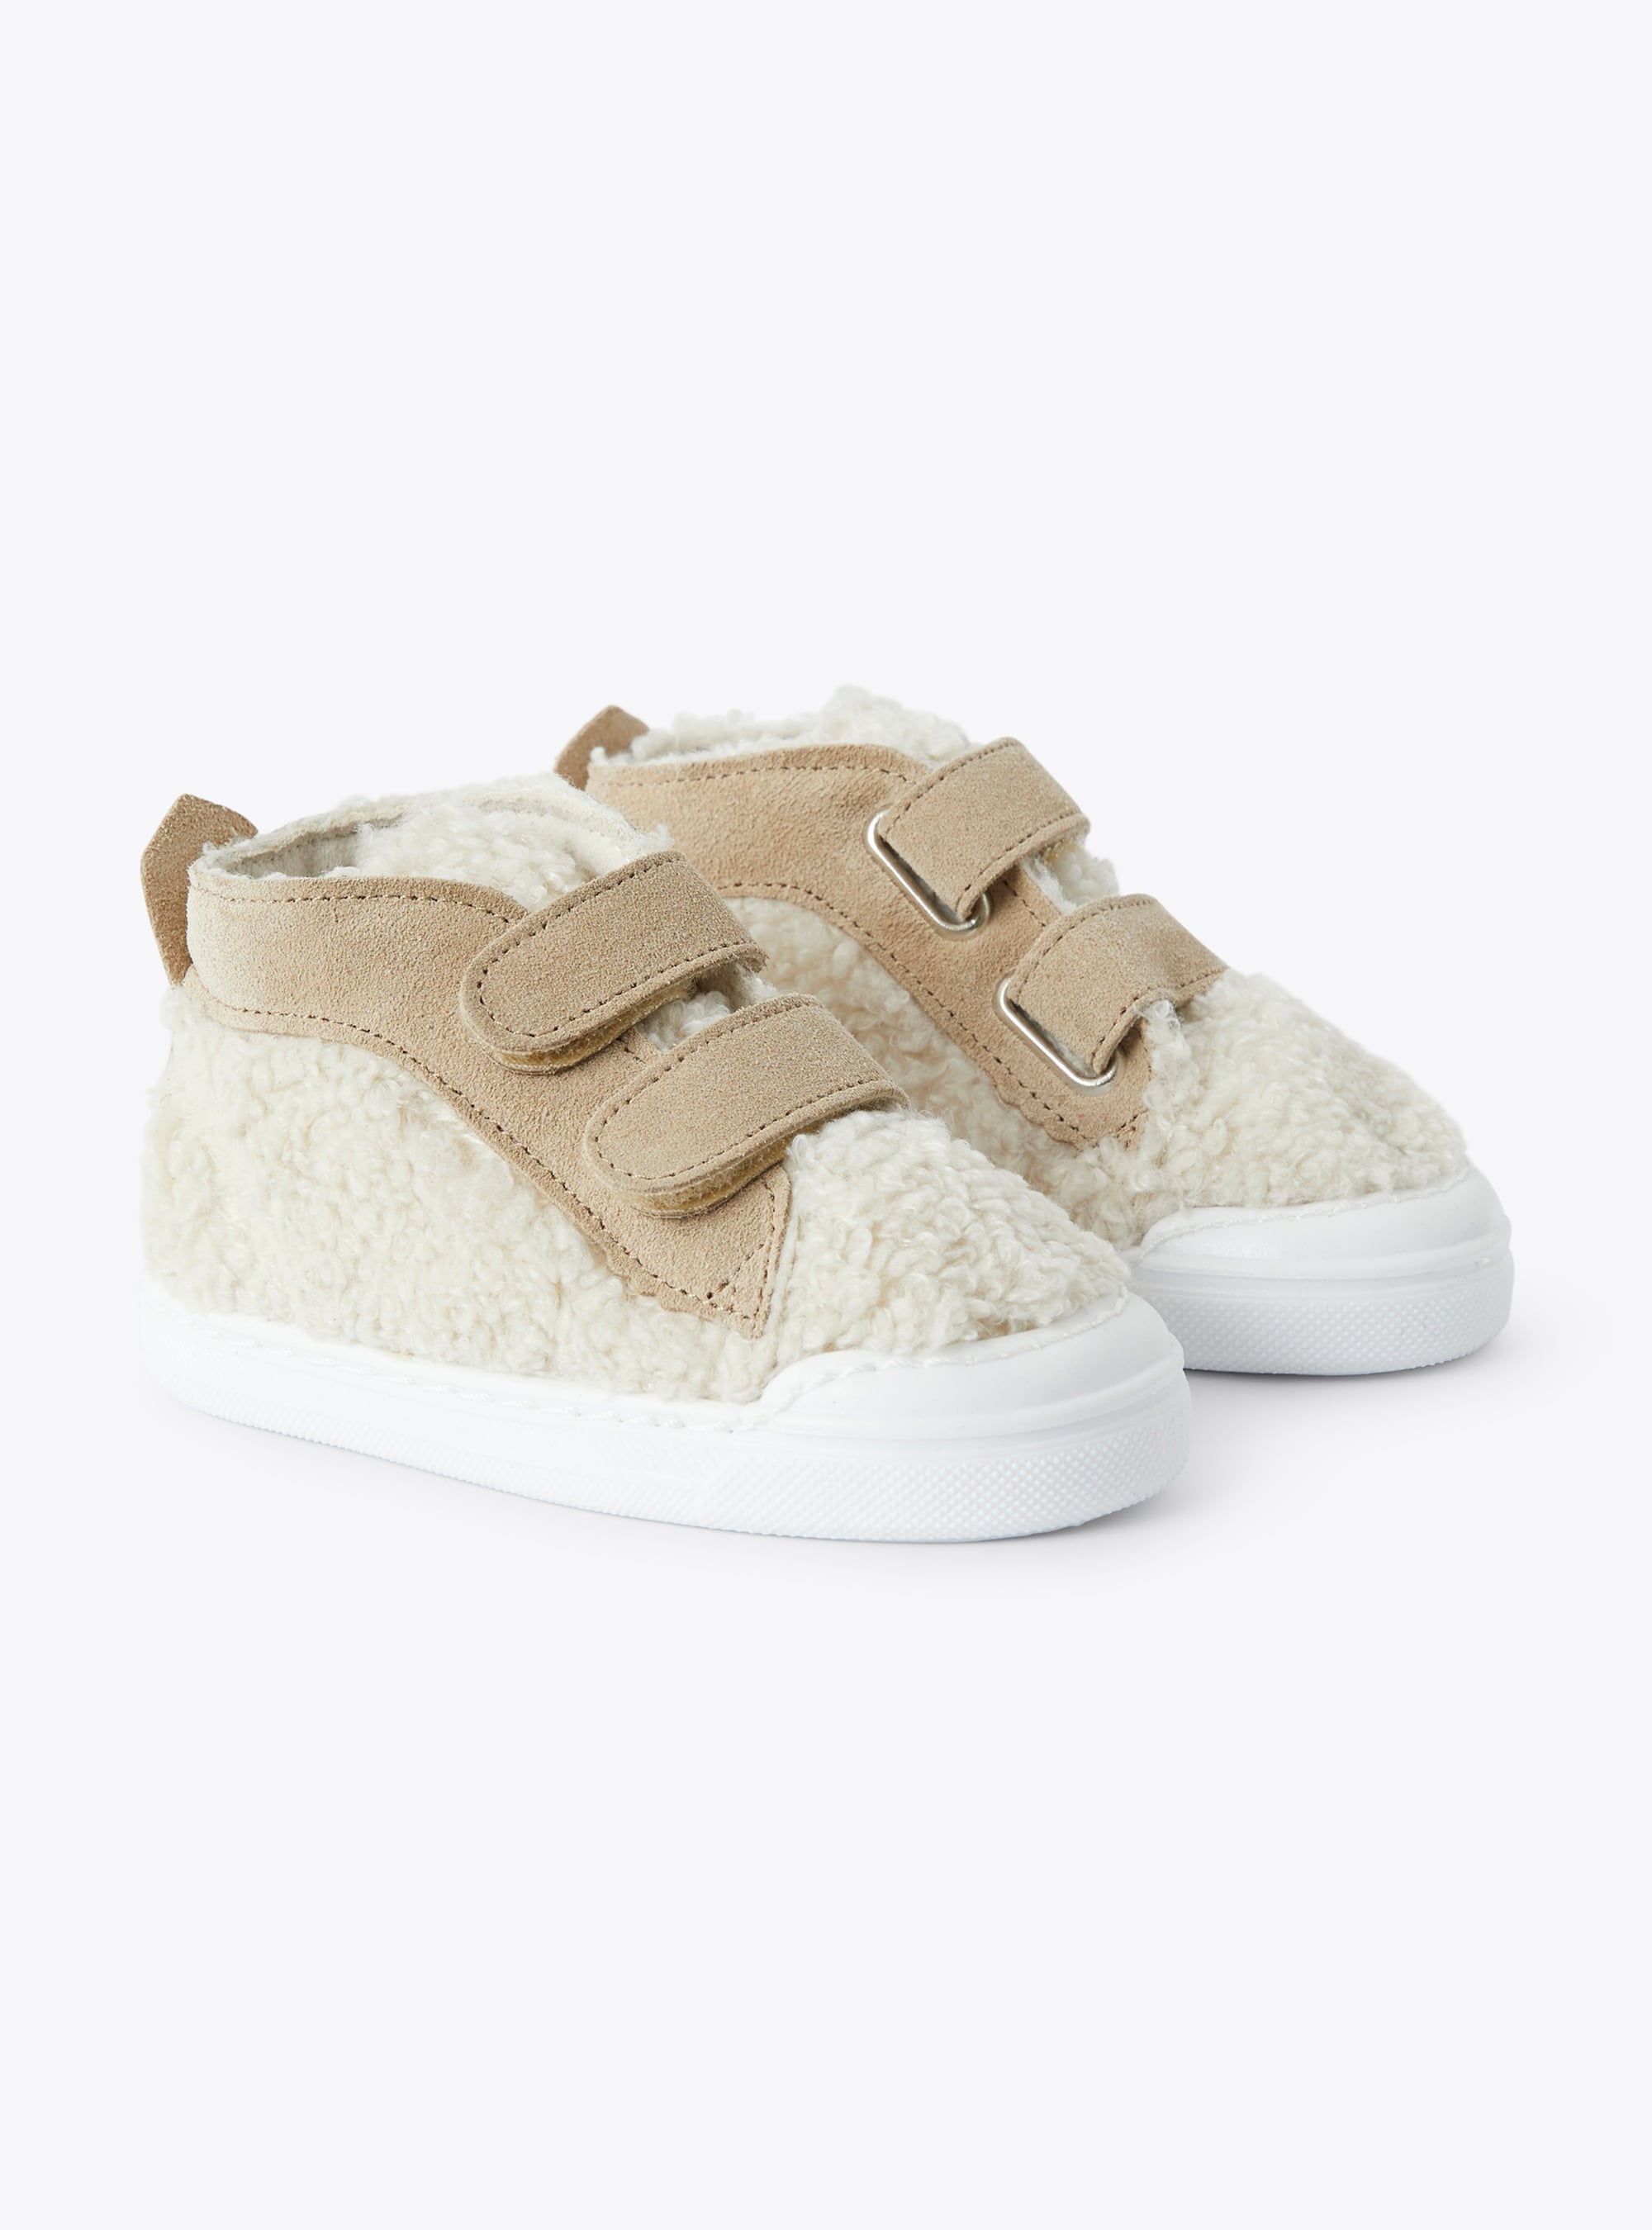 High-top sneaker in natural-hued teddy fleece - Shoes - Il Gufo